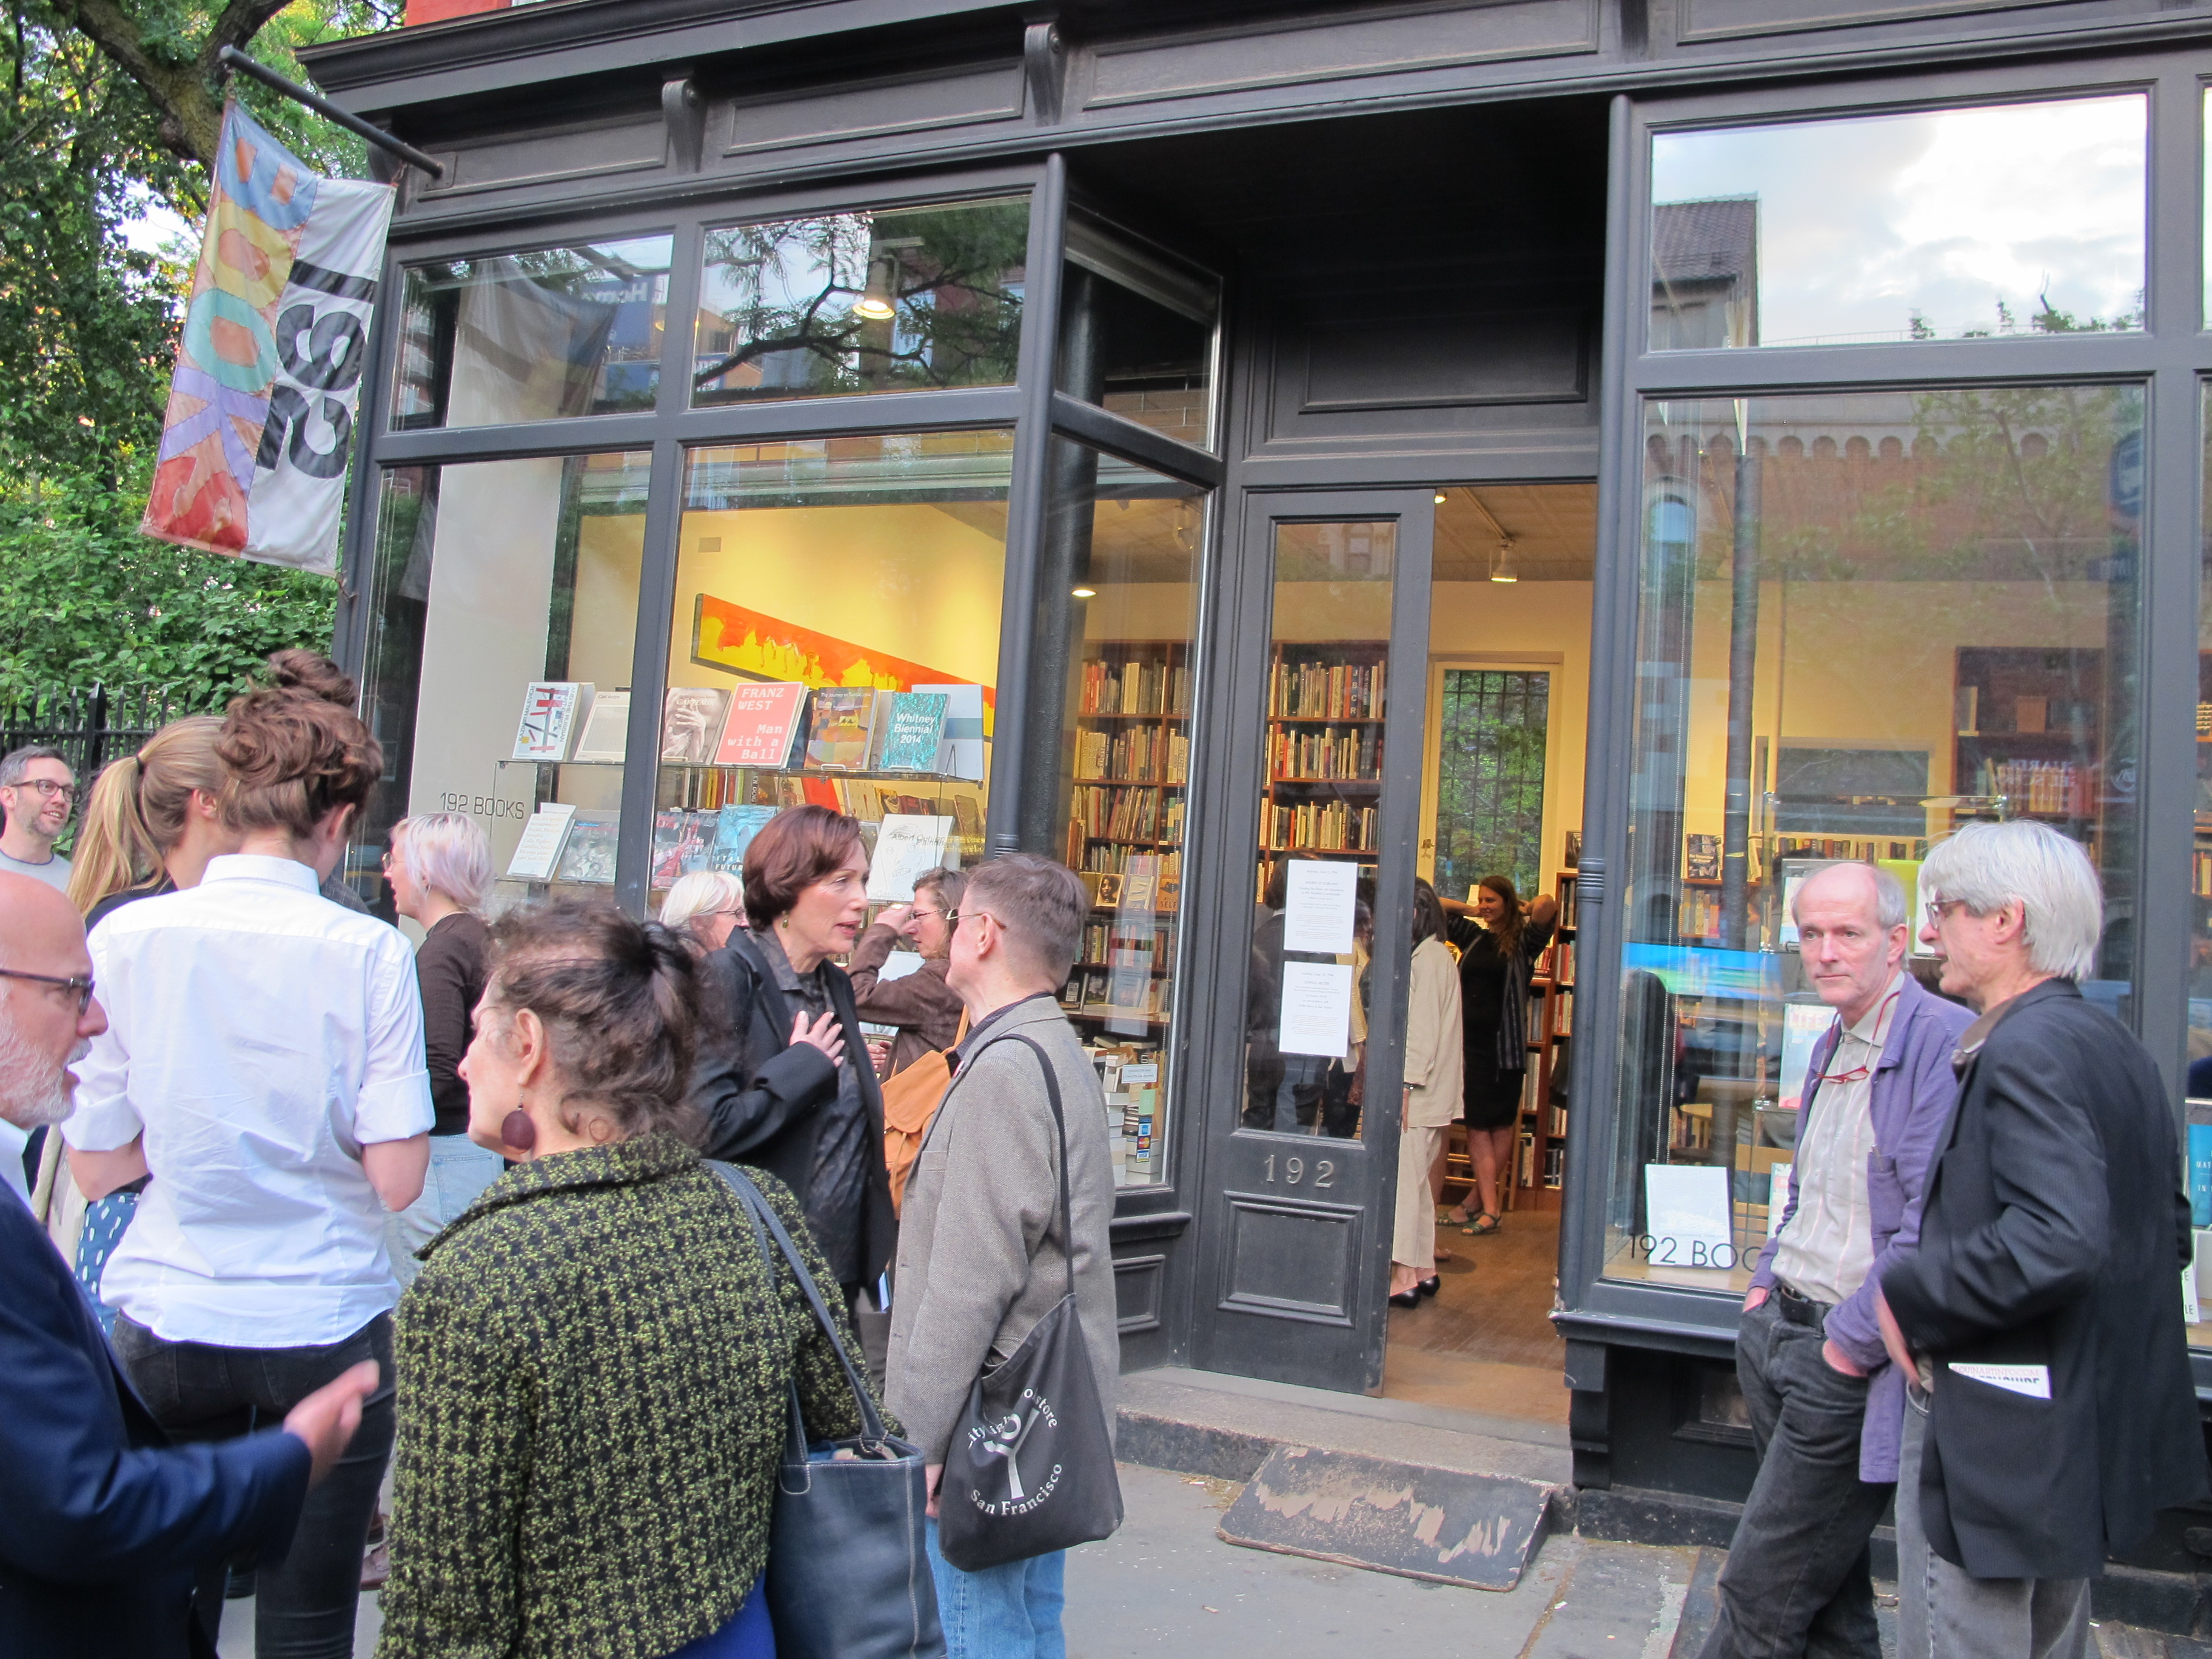  Highlights from the Allen Ruppersberg Sourcebook Launch at 192 Books